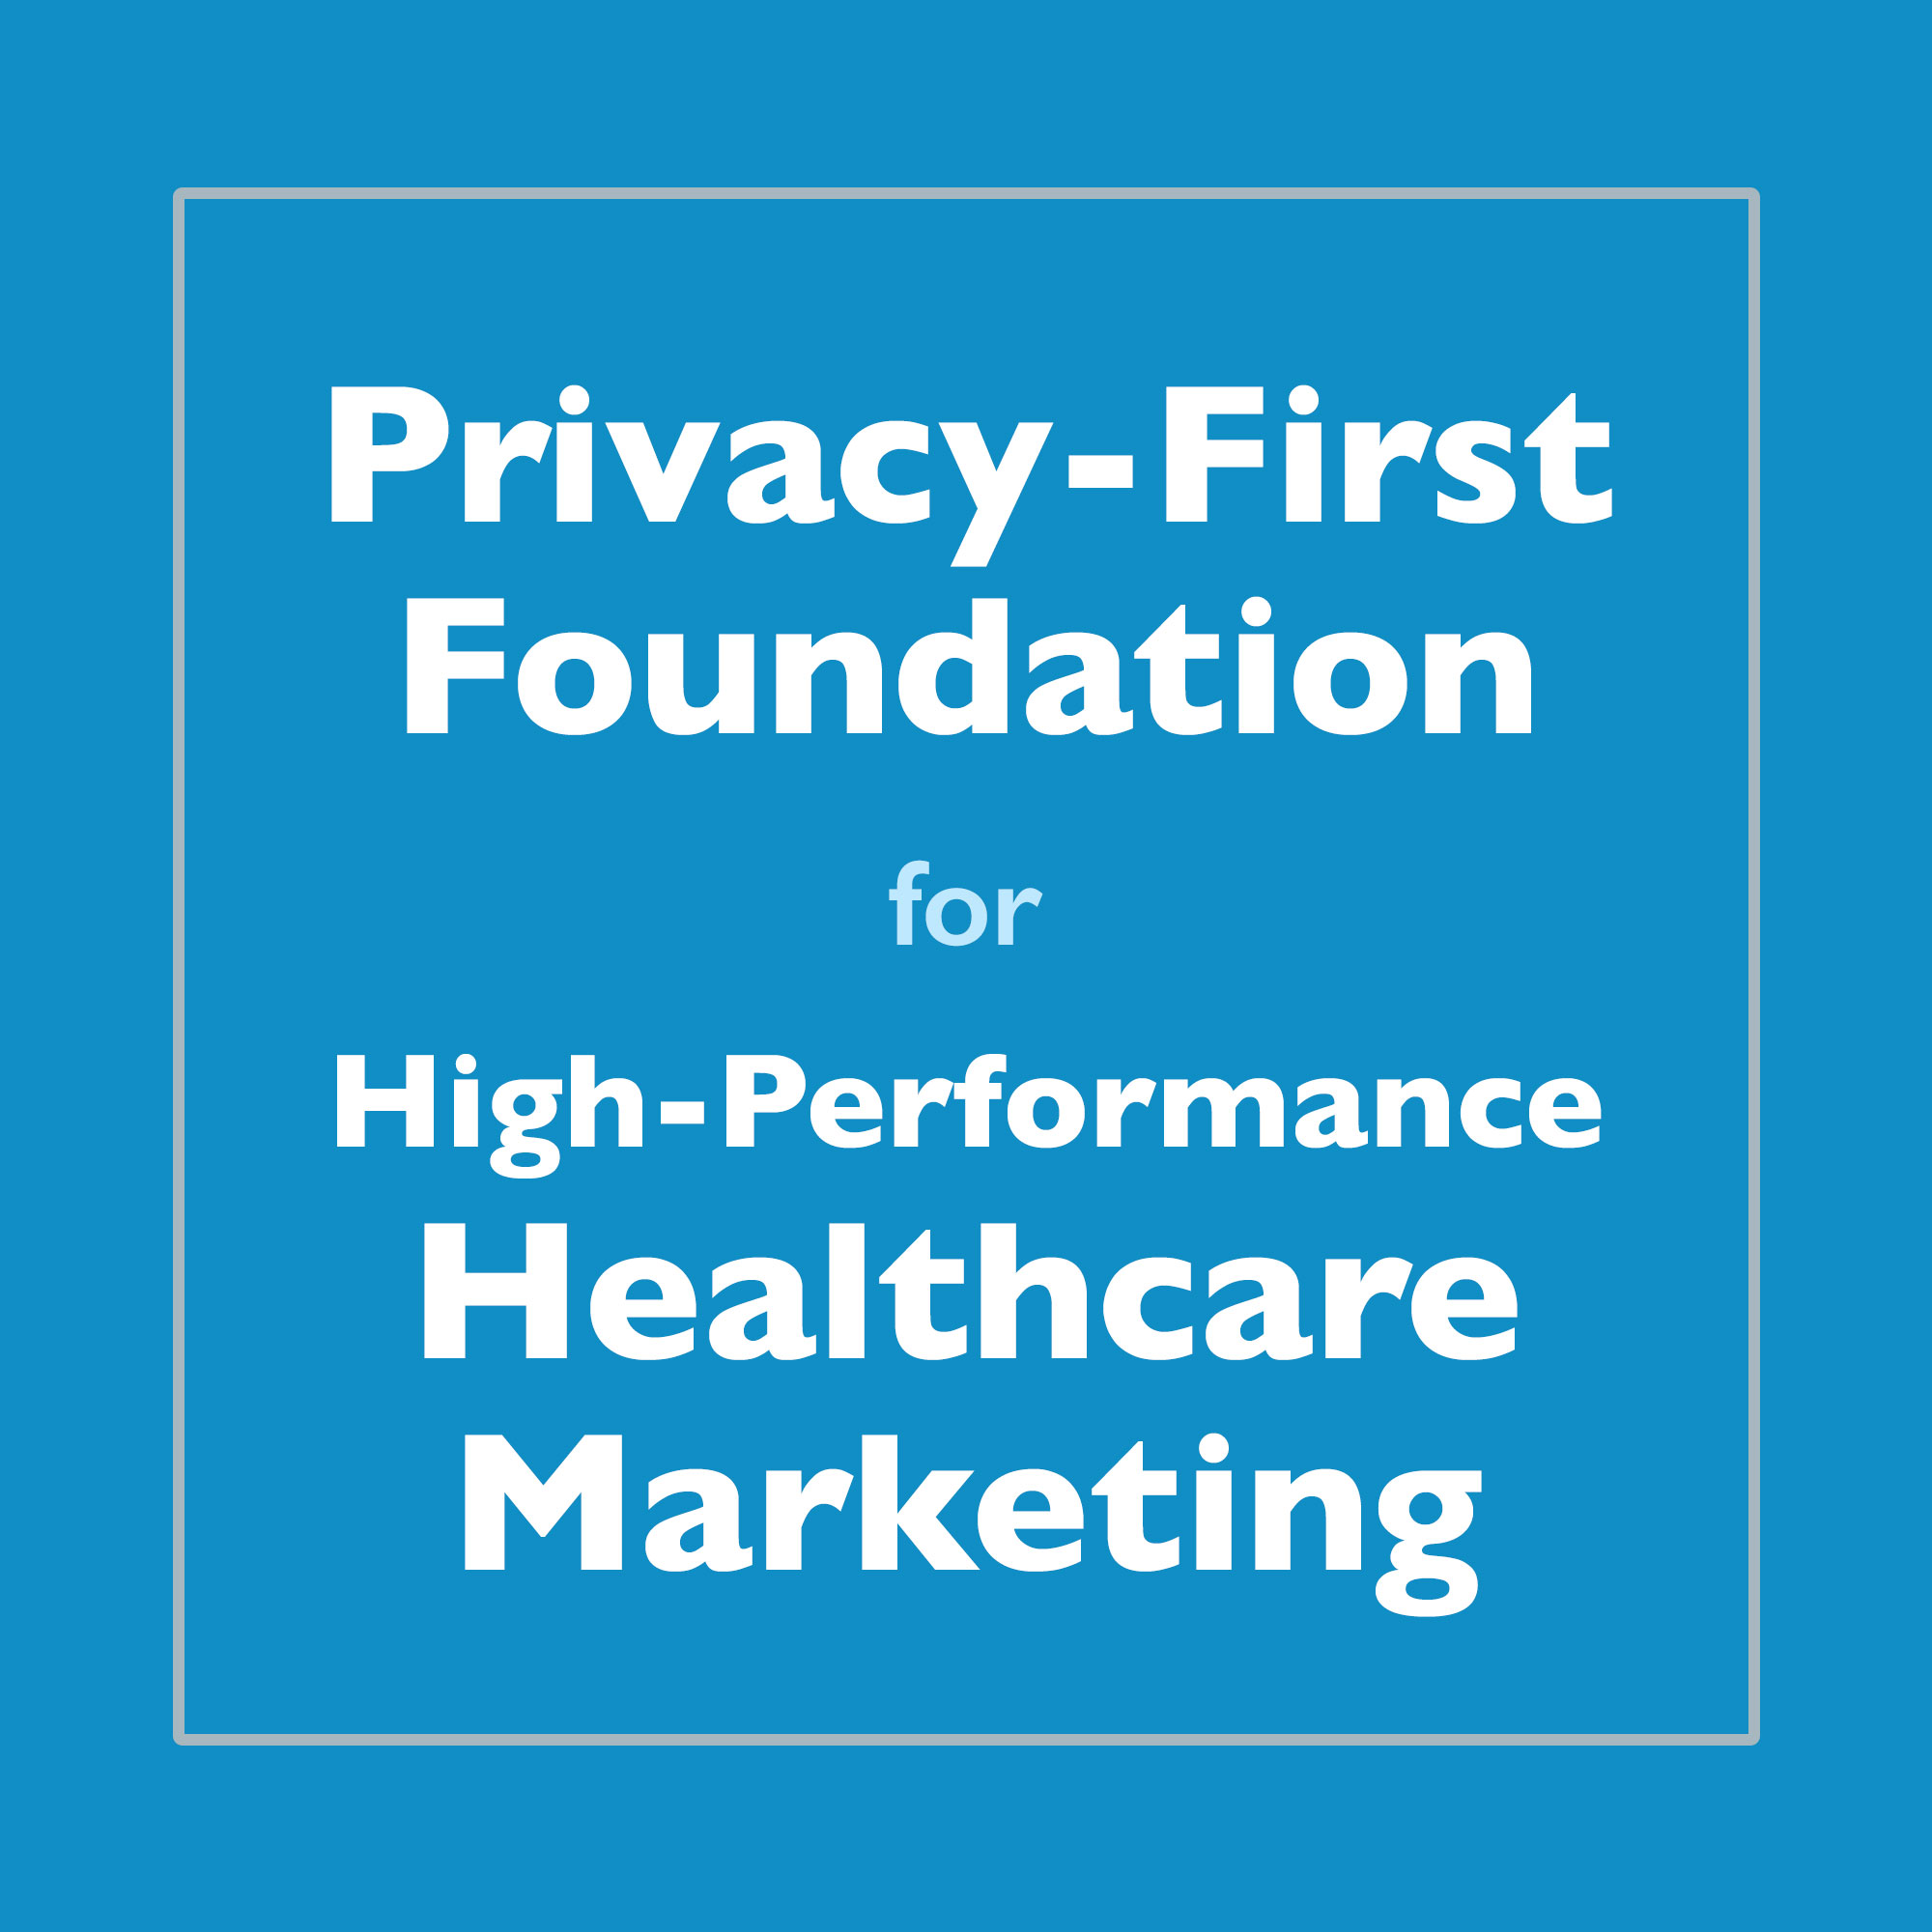 Privacy-First Foundation for High-Performance Healthcare Marketing